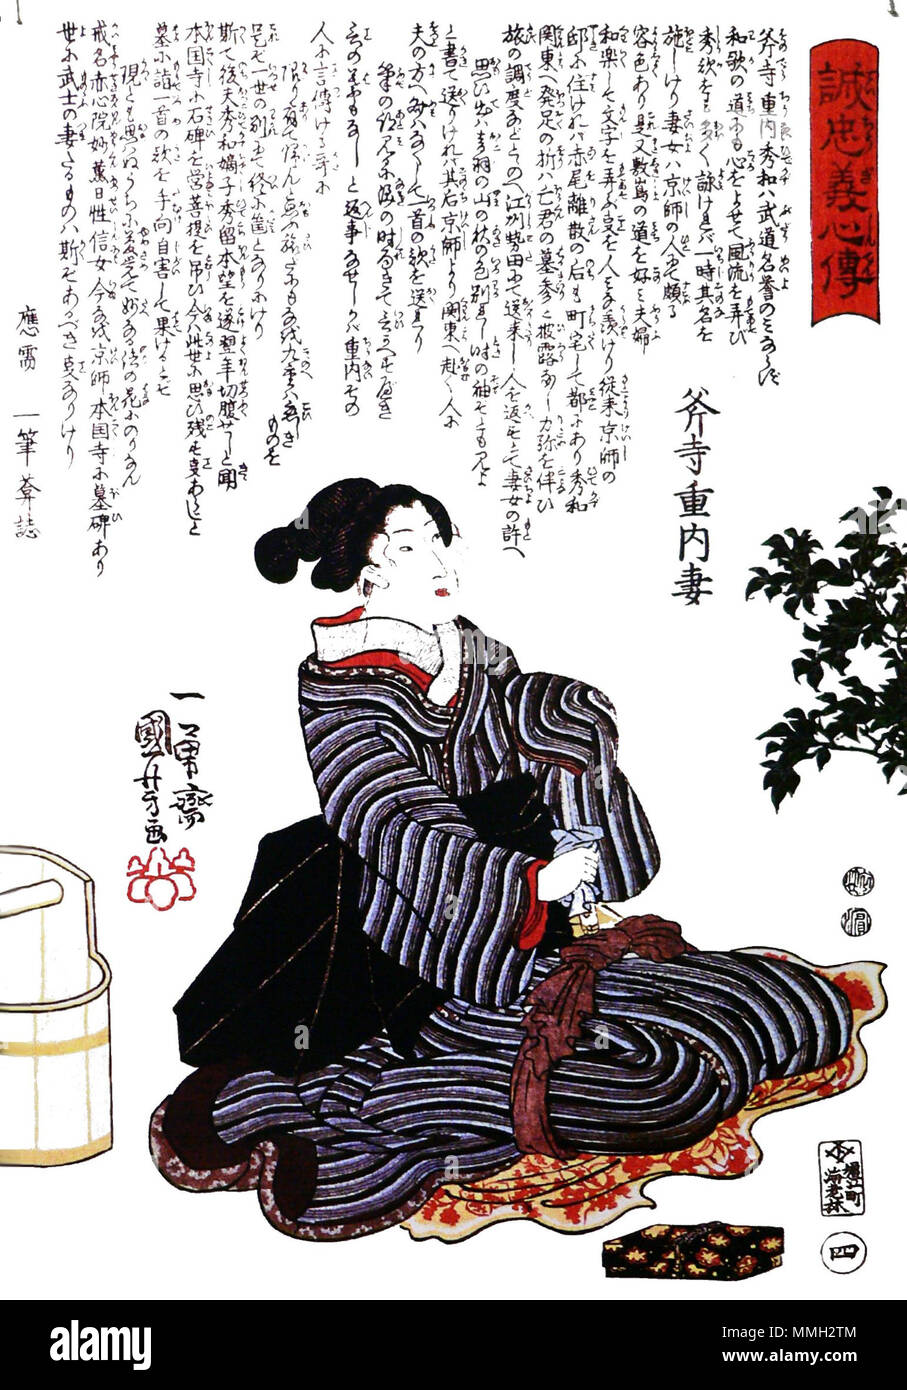 English Onodera Junai S Wife One Of The 47 Ronin Preparing For Jigai Female Version Of Seppuku To Follow Her Husband In Death Legs Are Bound As To Maintain A Decent